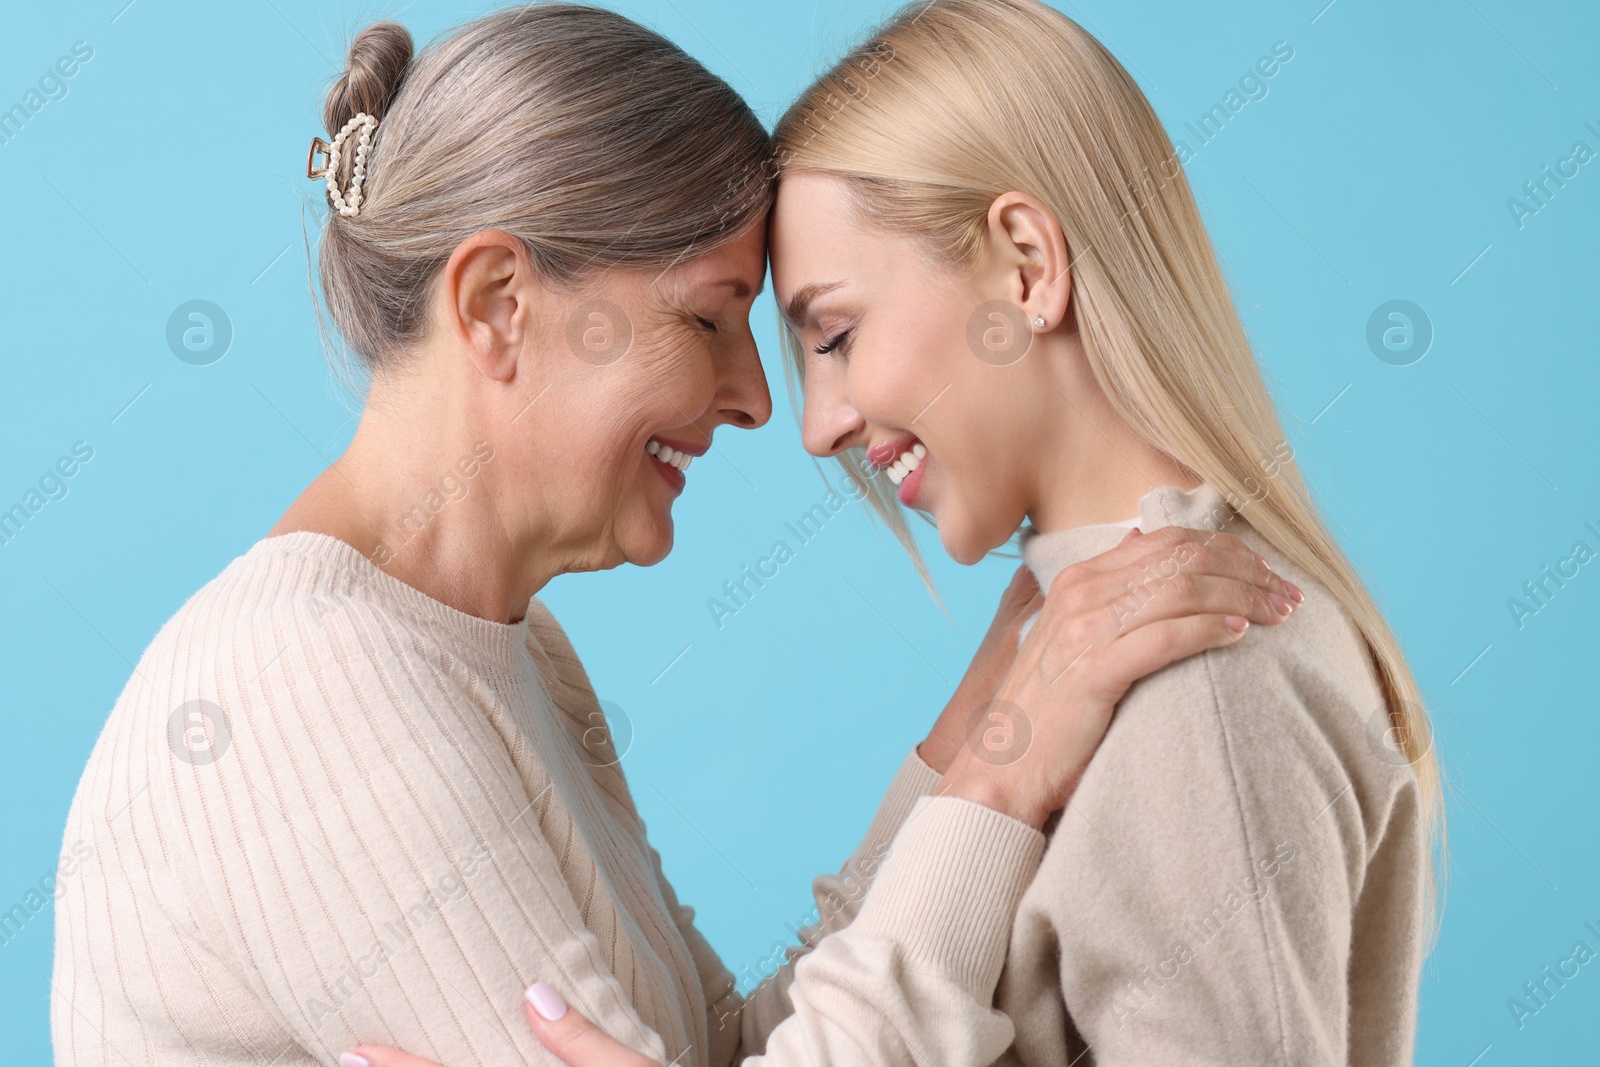 Photo of Family portrait of young woman and her mother on light blue background